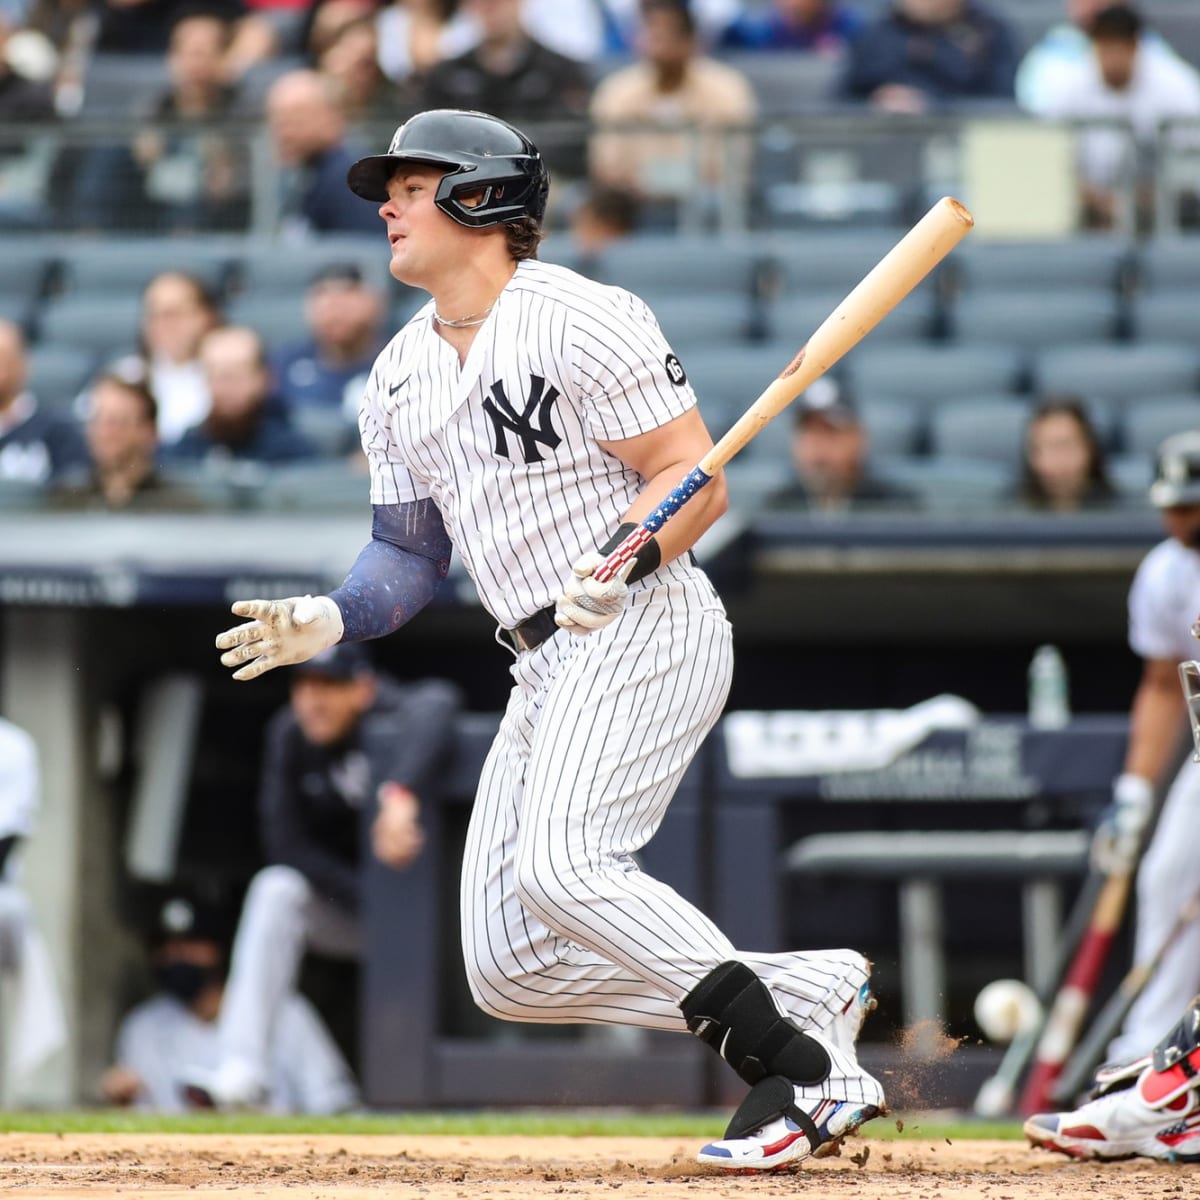 Luke Voit and NY Yankees success doesn't surprise his college coach